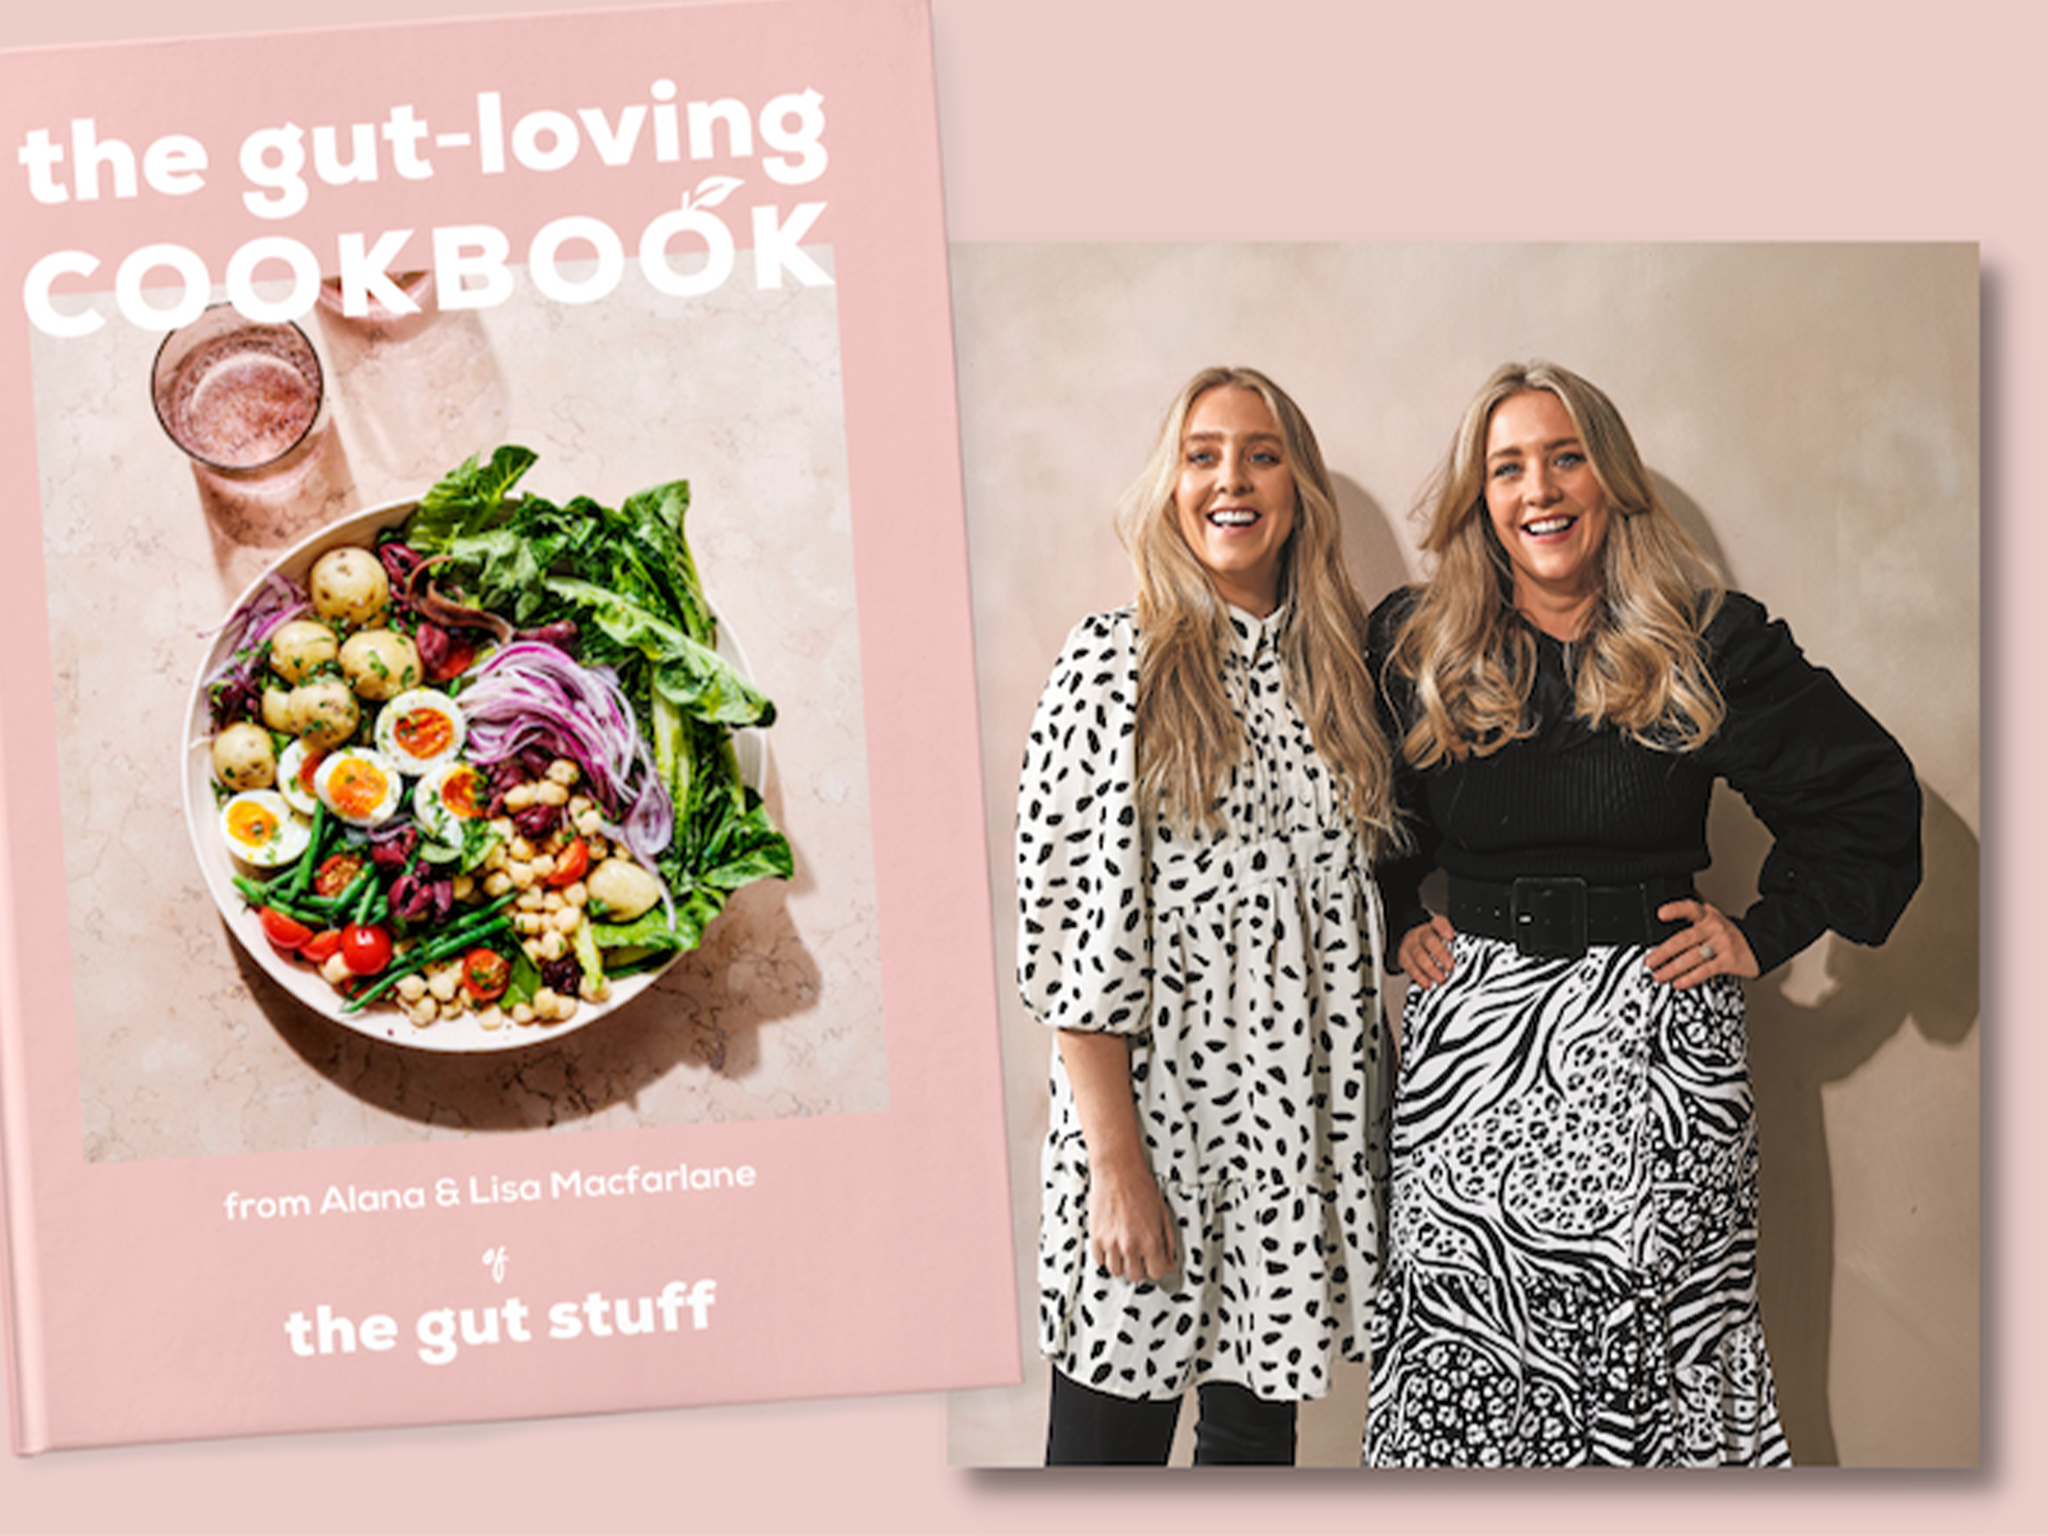 ‘GUT-LOVING COOKBOOK’ BY ALANA AND LISA MACFARLANE, PUBLISHED BY PAVILION